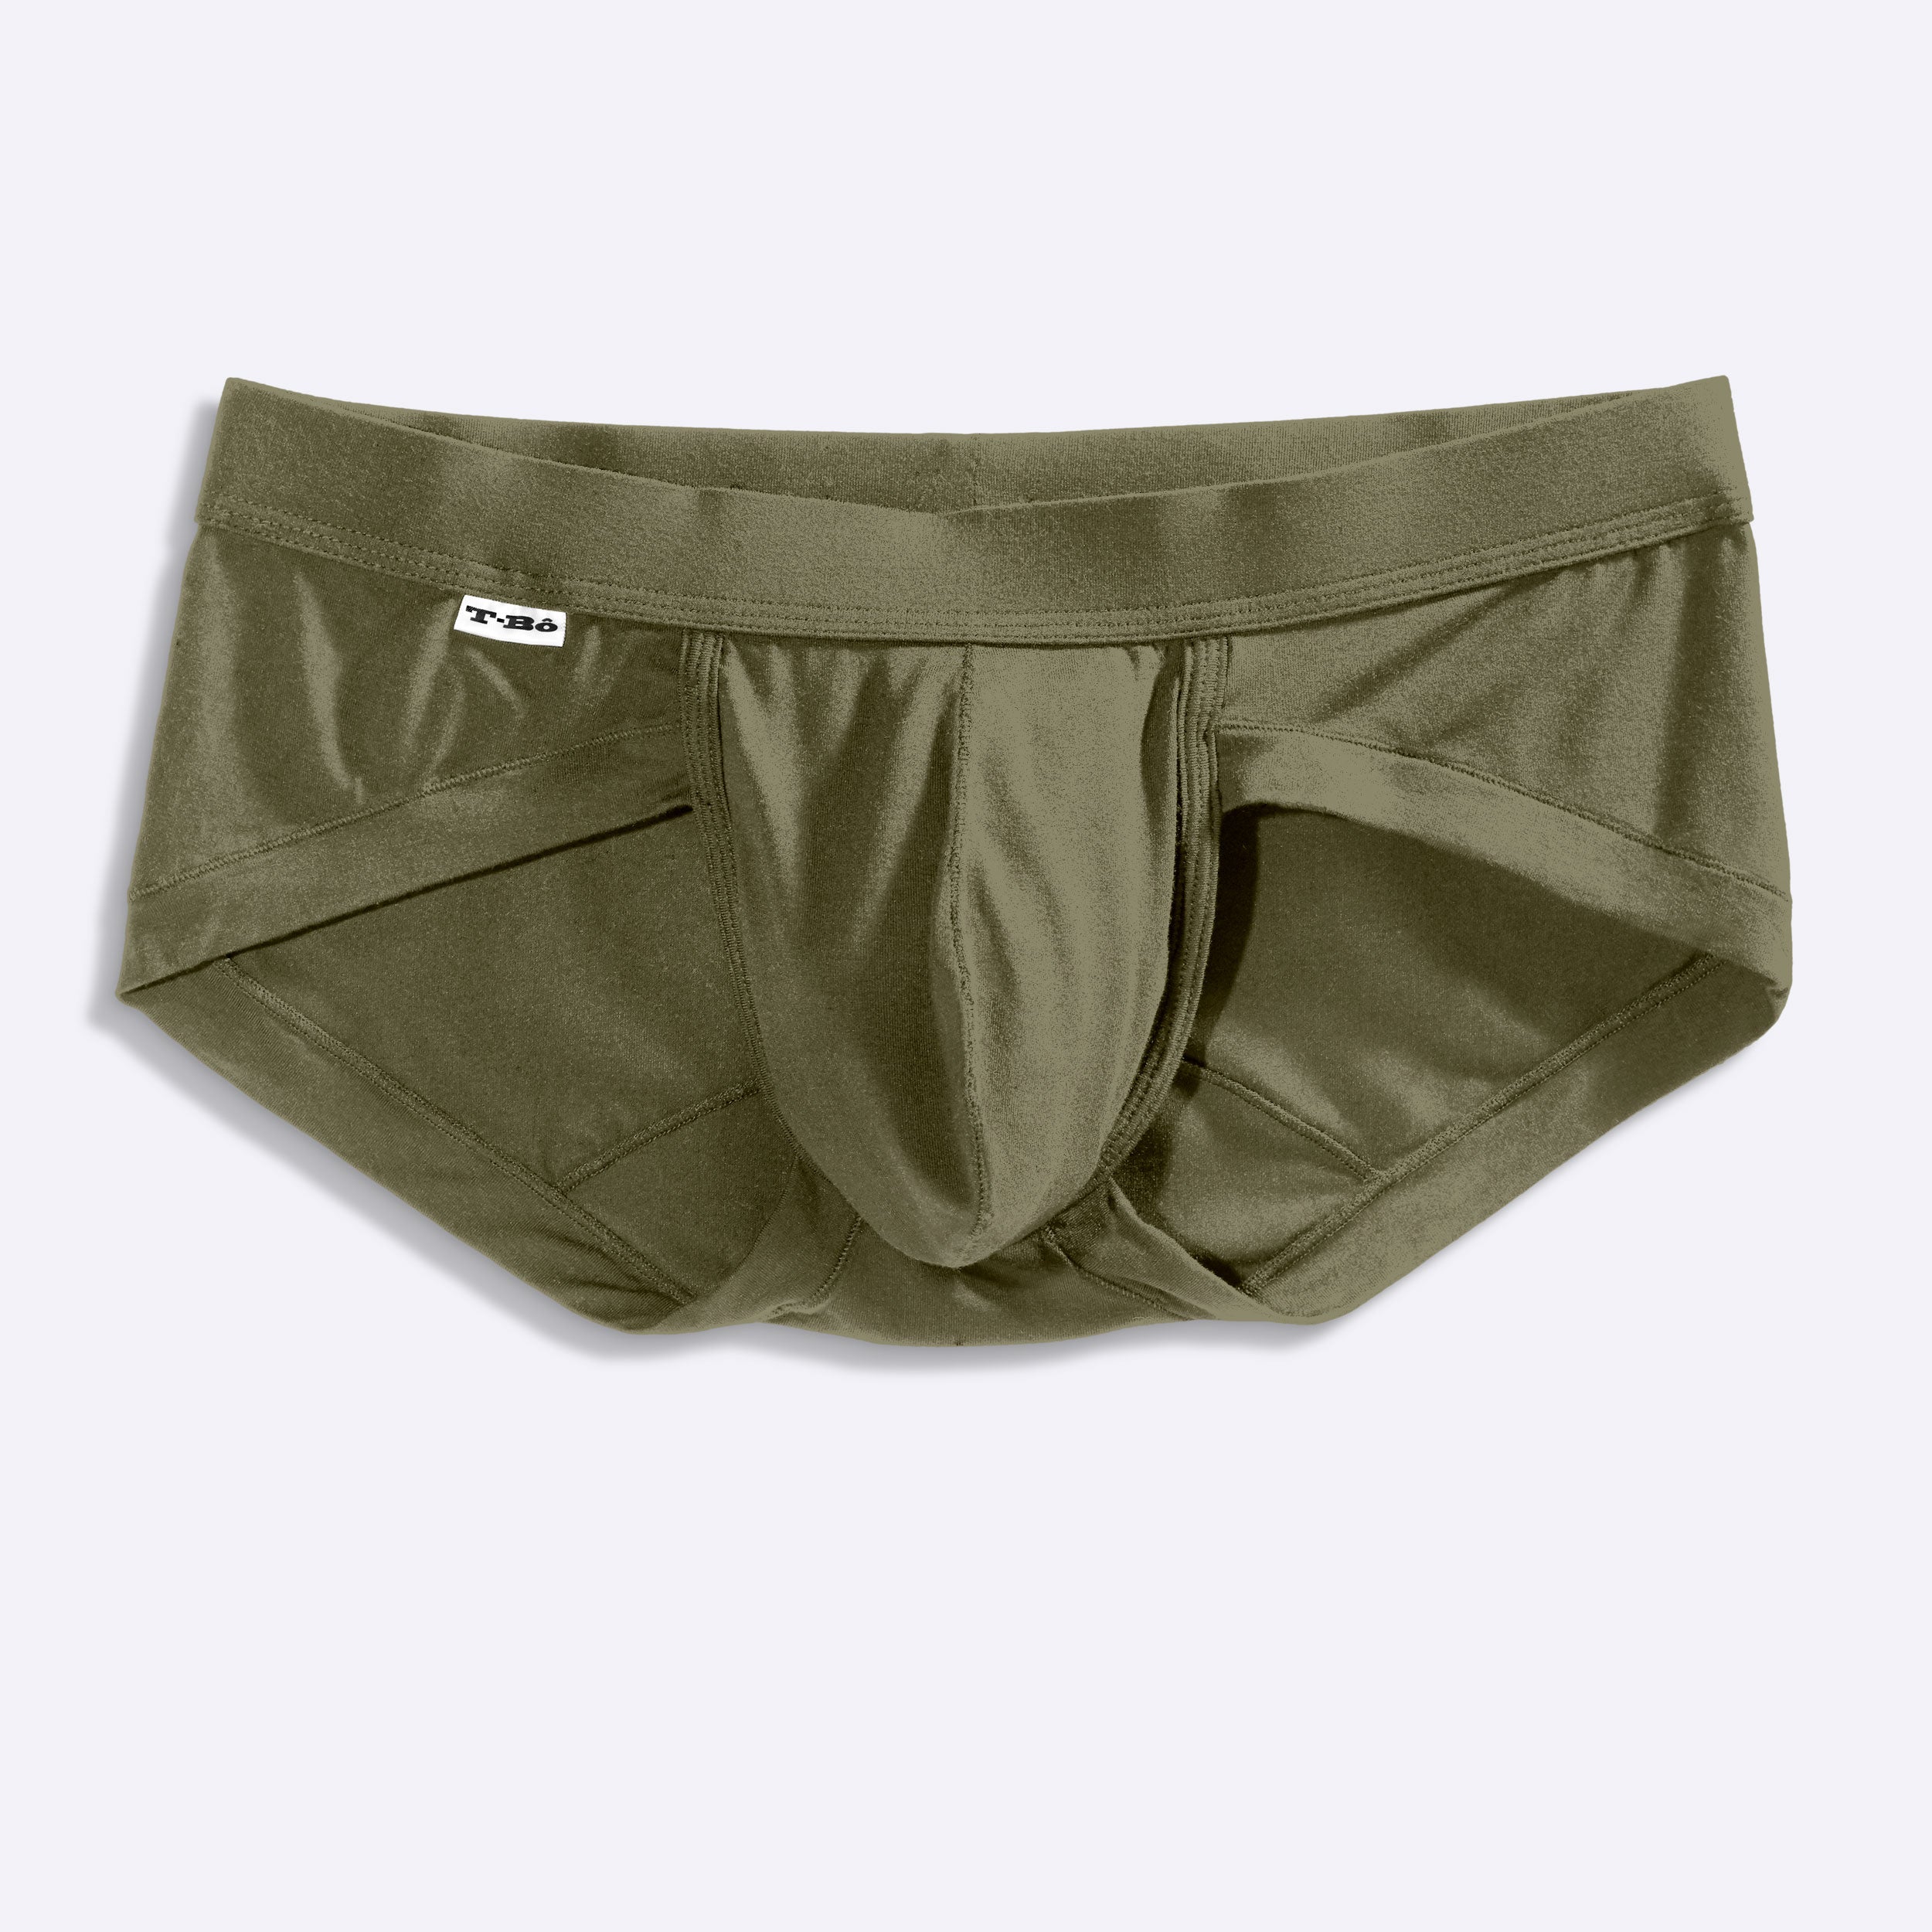 T-Bô Underwear Is Fit For The Modern Man And His Modern Lifestyle.